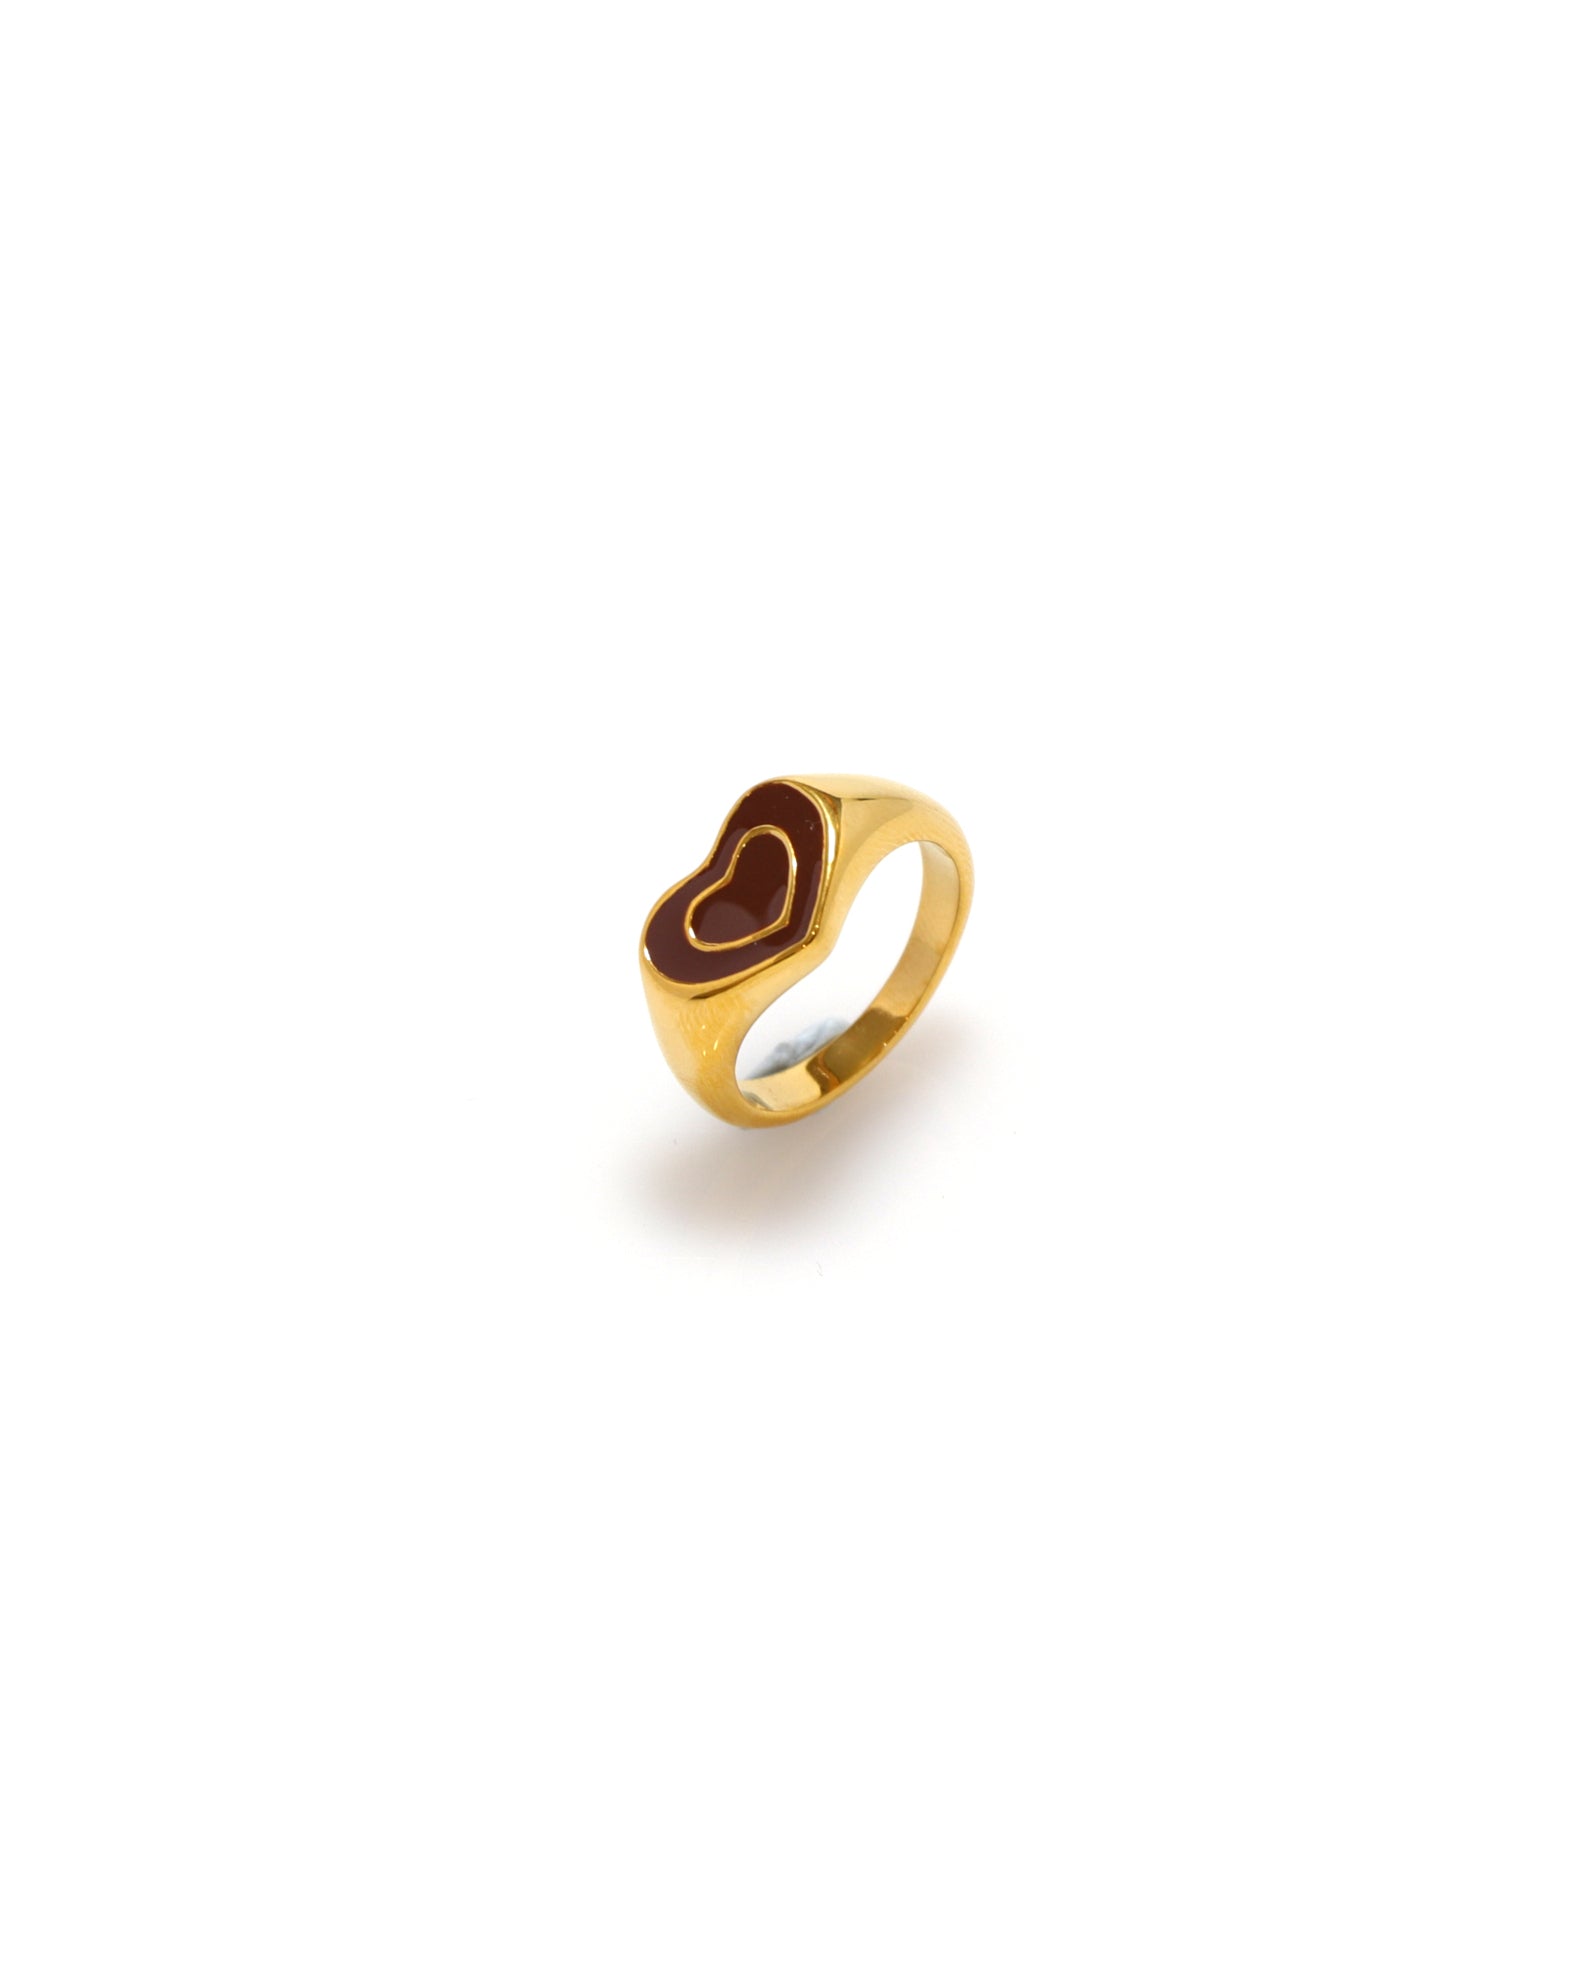 Brown Heart Gold Ring